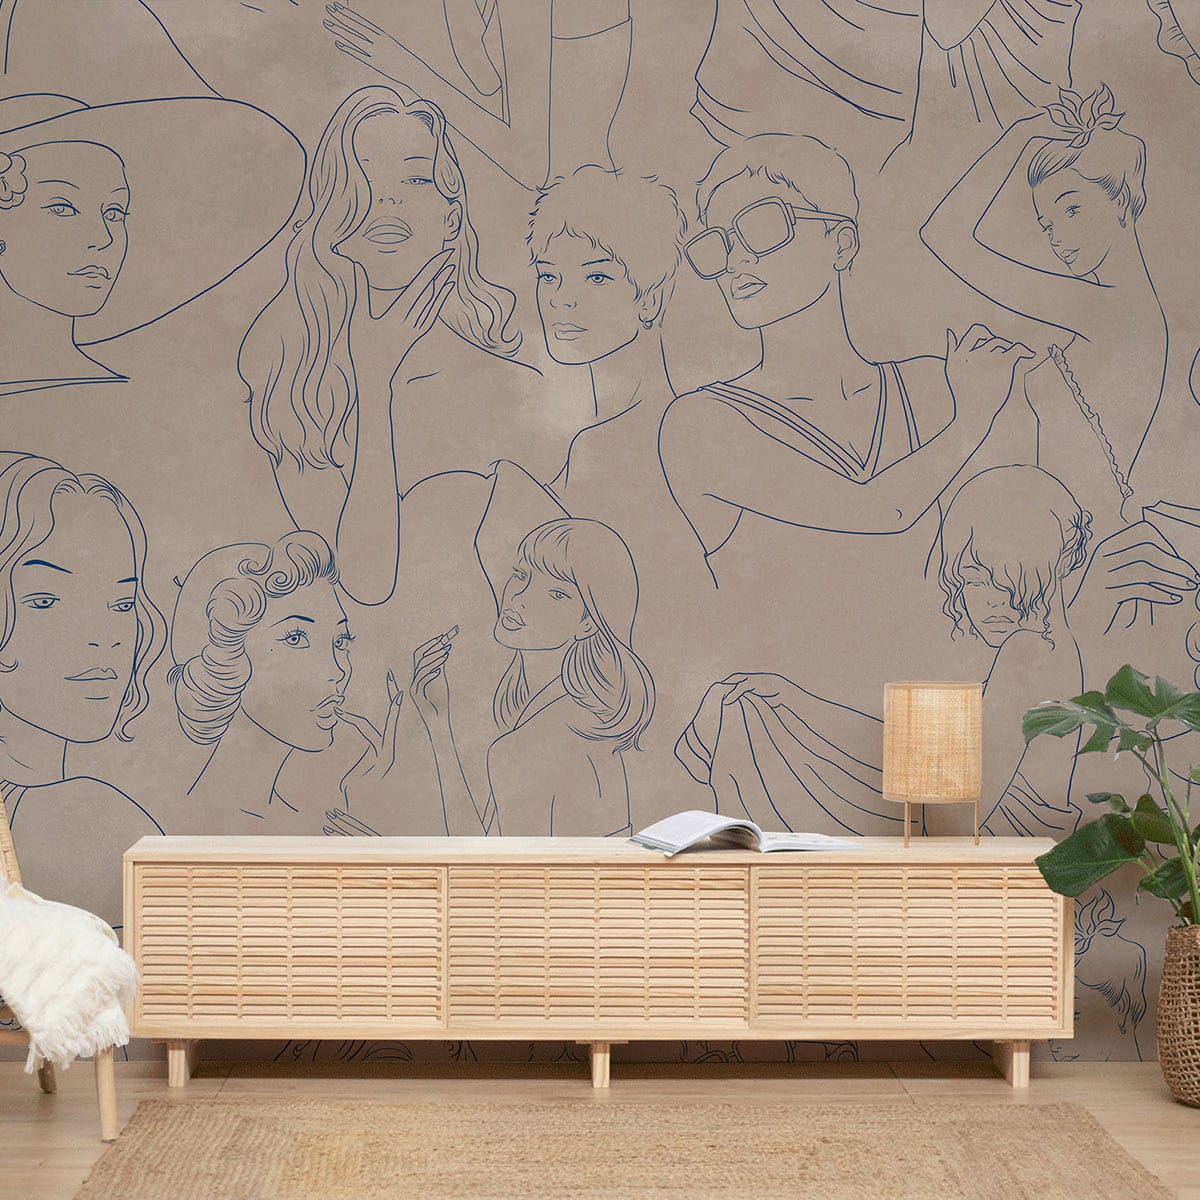 Wallpaper mural for the house interior decorated with a brown backdrop pattern